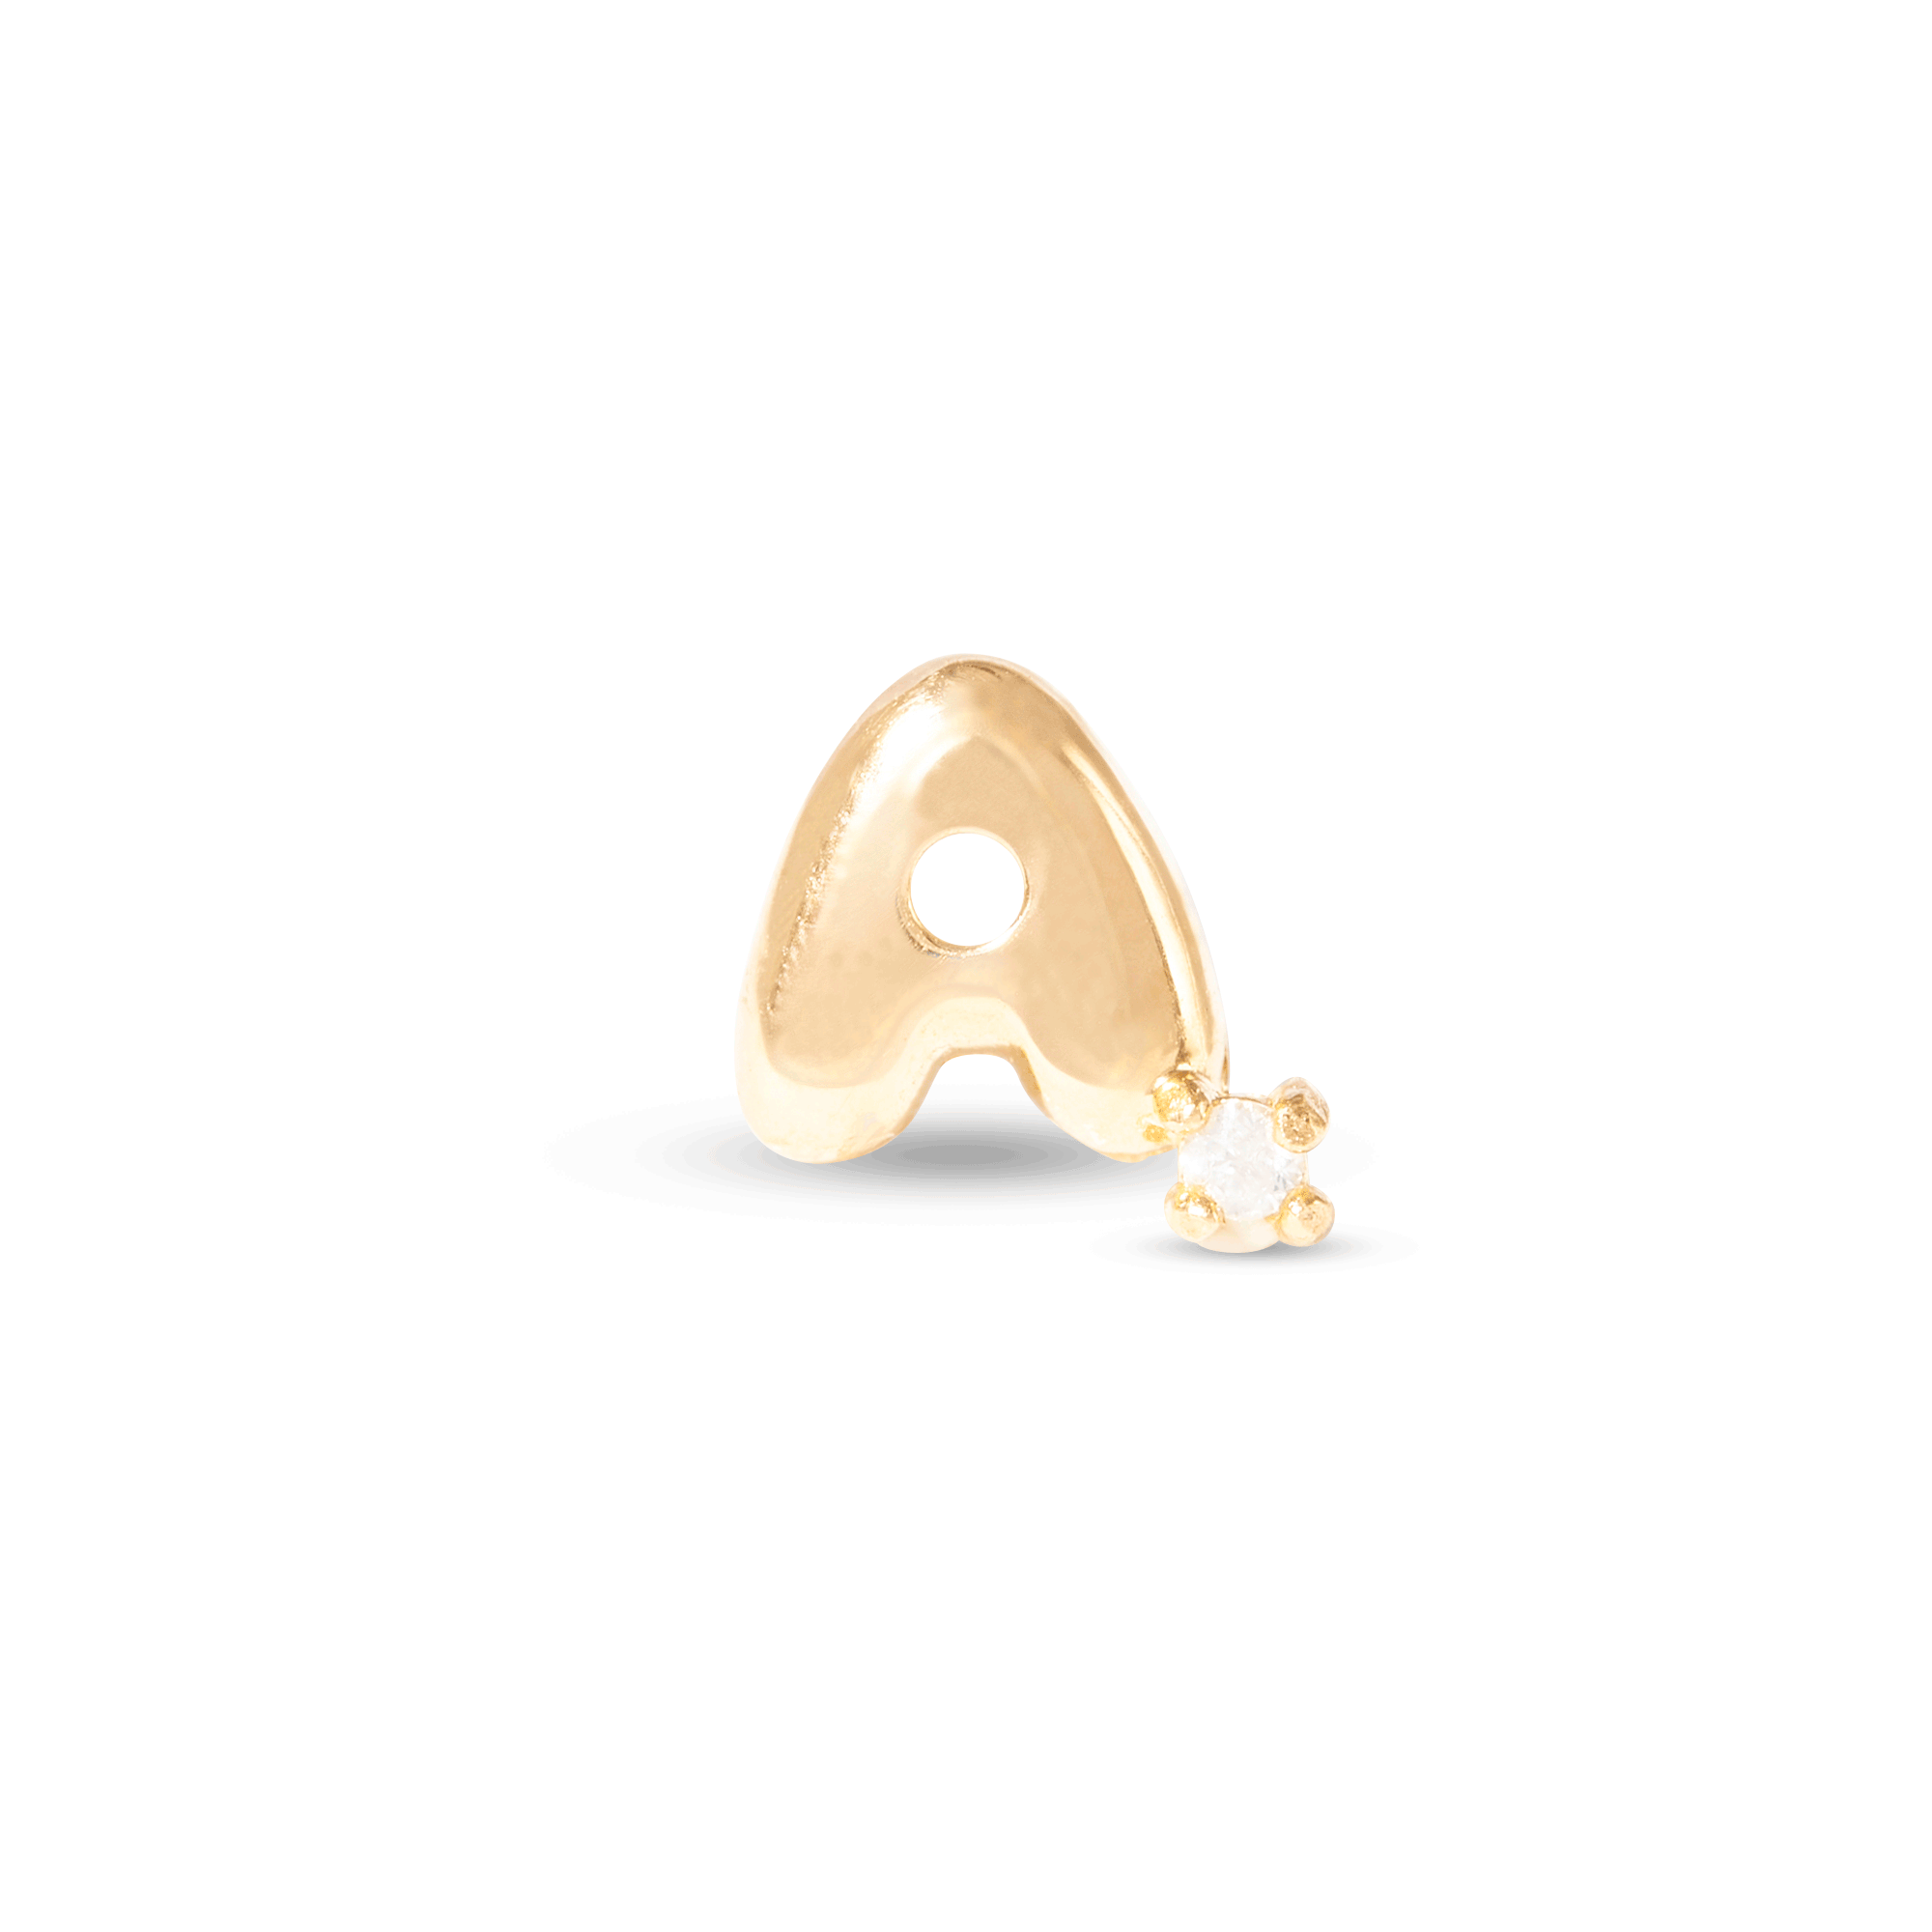 https://cdn.shopify.com/s/files/1/2197/1801/products/TINY-BUBBLE-TEA-WITH-DIAMOND-EARRING-A.png?v=1642179860